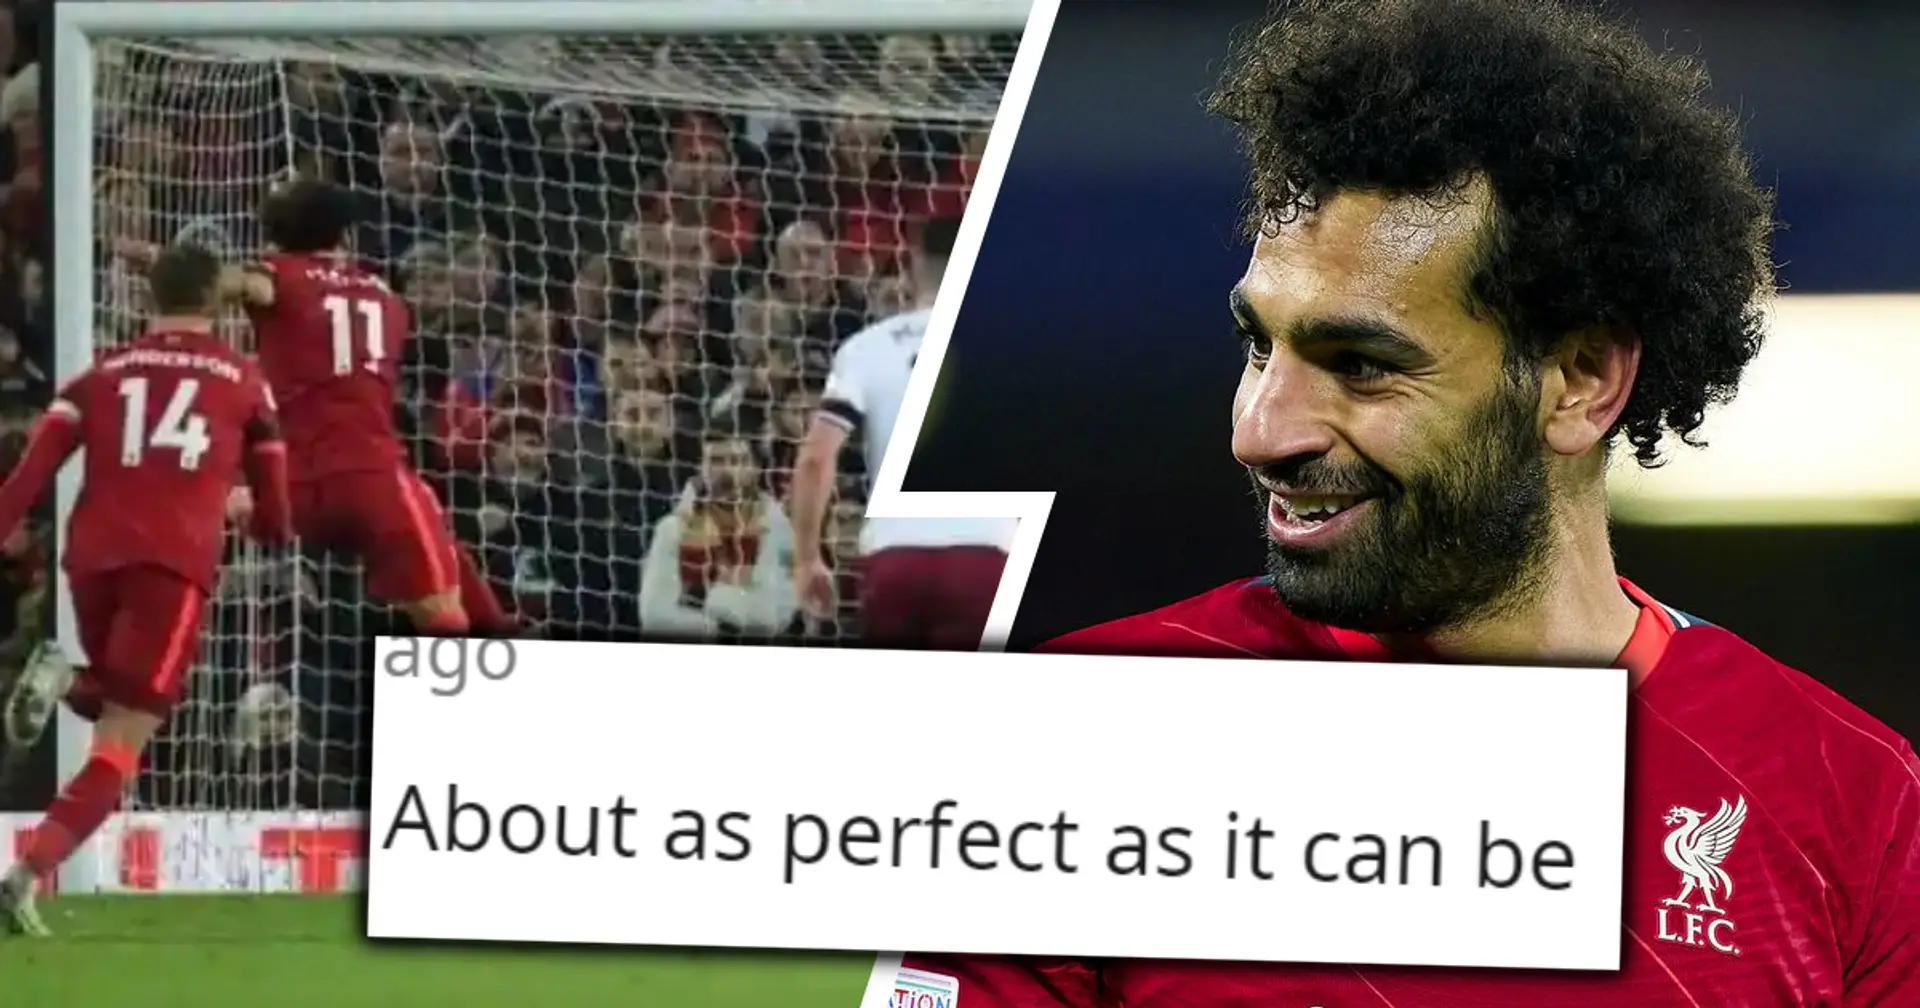 'Perfect as can be', 'Nothing you can improve': LFC fans laud Salah for ideal penalty against Aston Villa